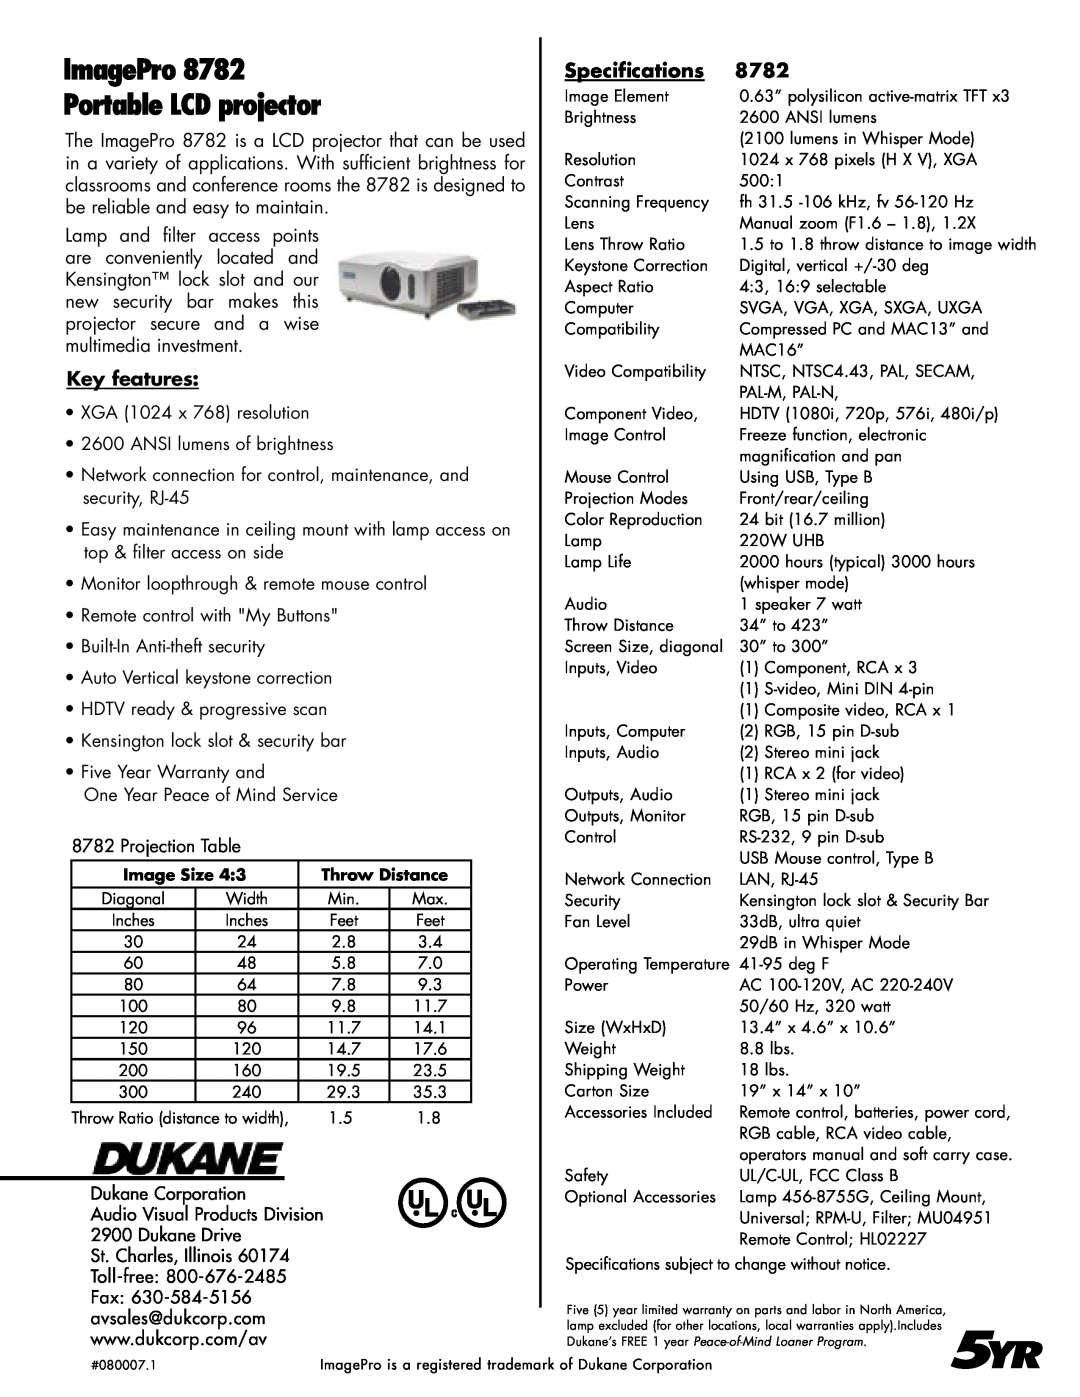 Dukane 8782 manual ImagePro, Portable LCD projector, Specifications, Key features 